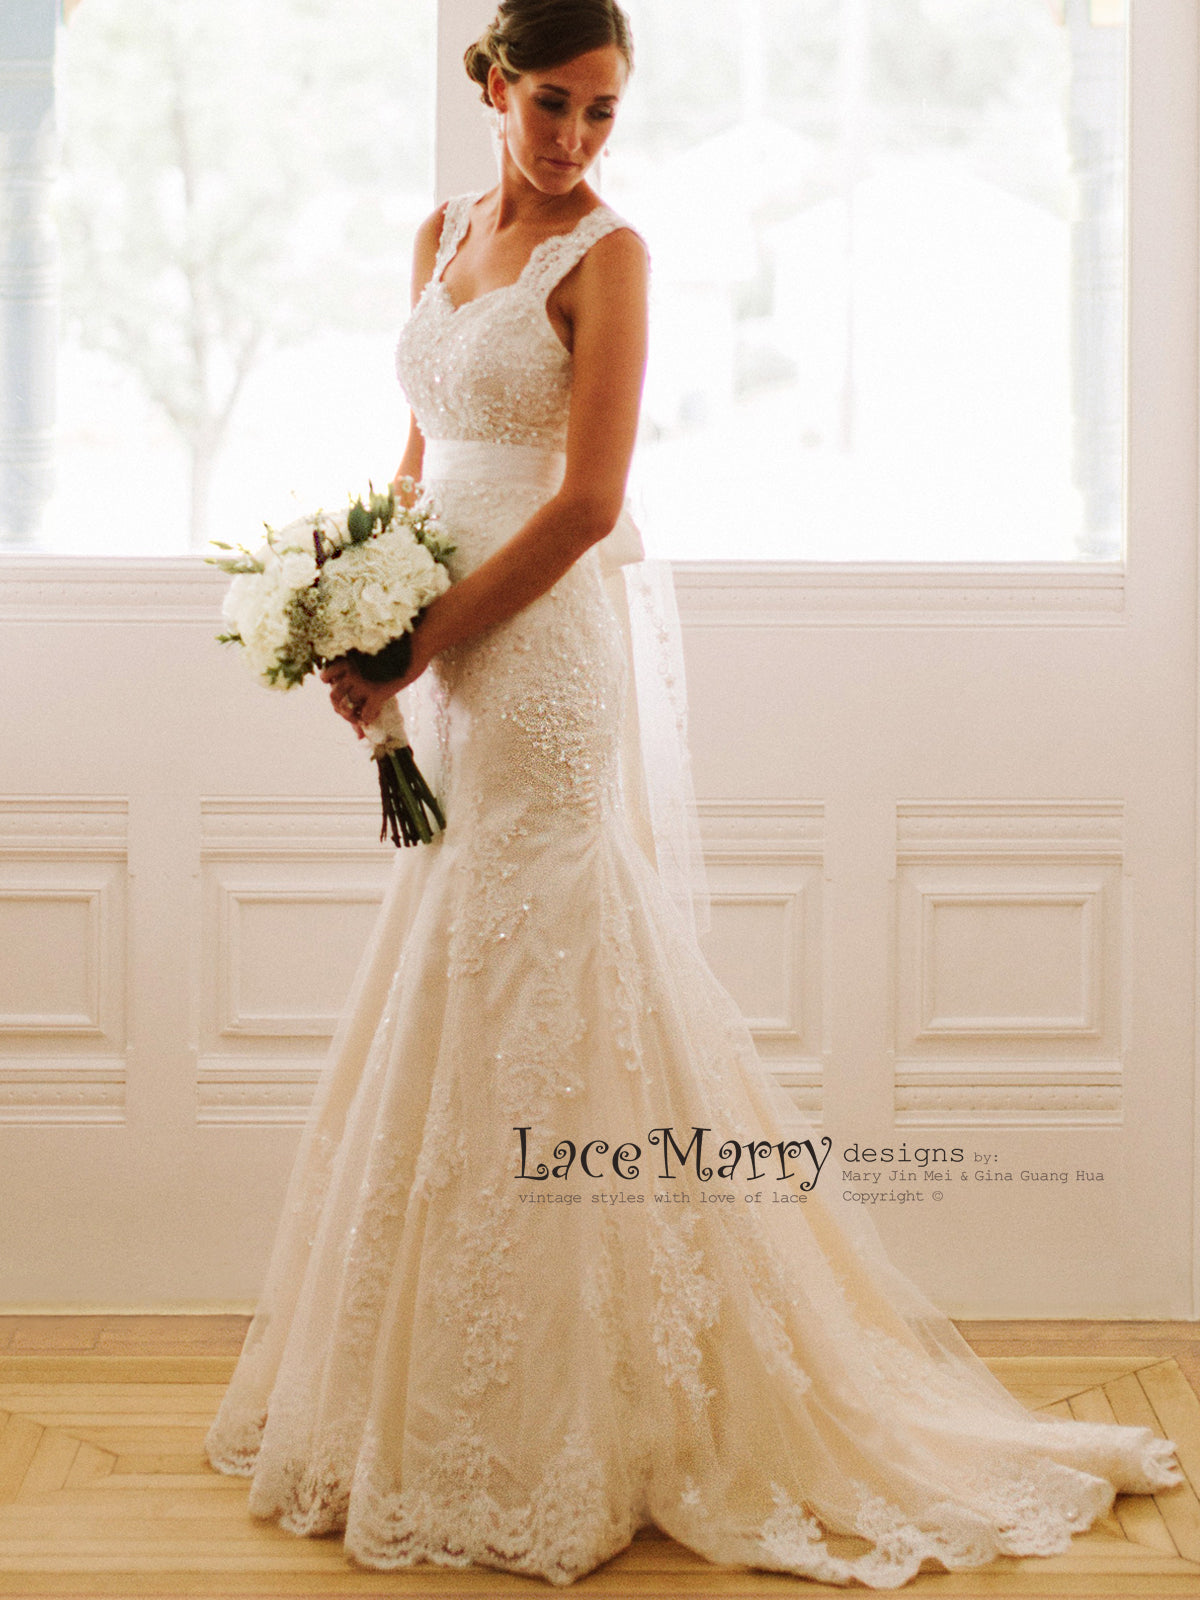 Lace Overlay Sheer Bridal Dress, Skirt, Top, Bridal Separates, Lace Skirt,  Black or Ivory Lace 